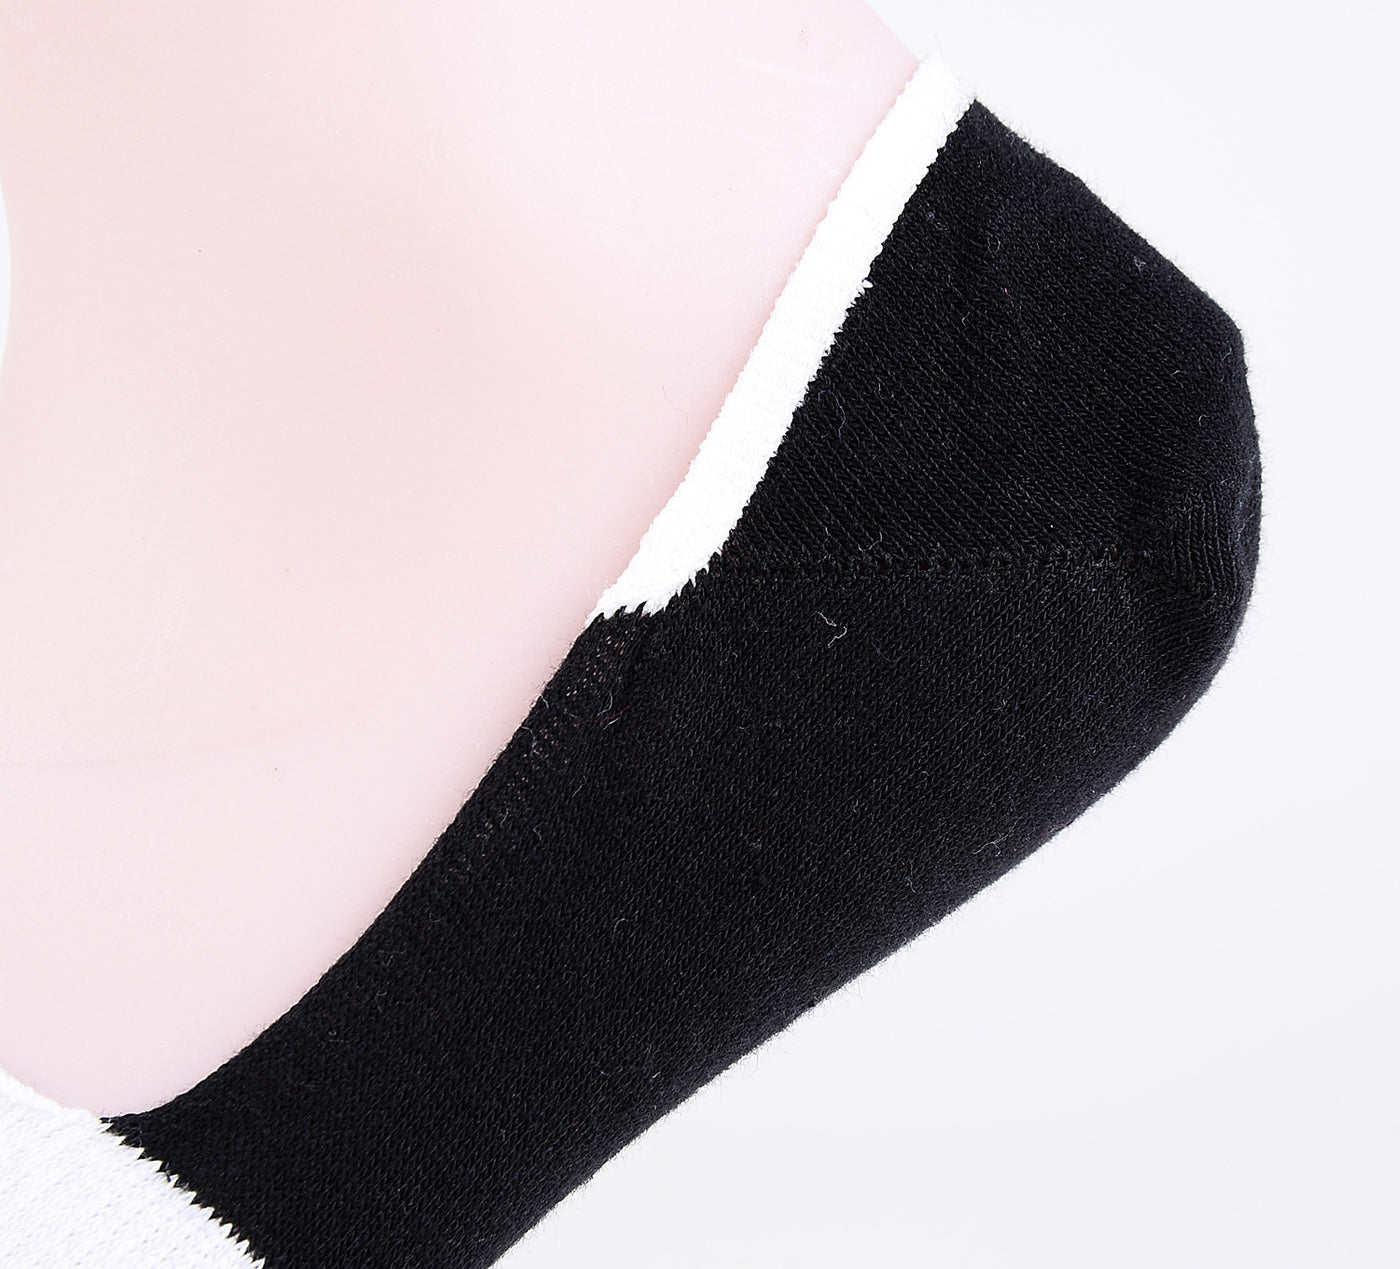 2 Pairs Finest Combed Cotton Invisible Socks Striped - Black